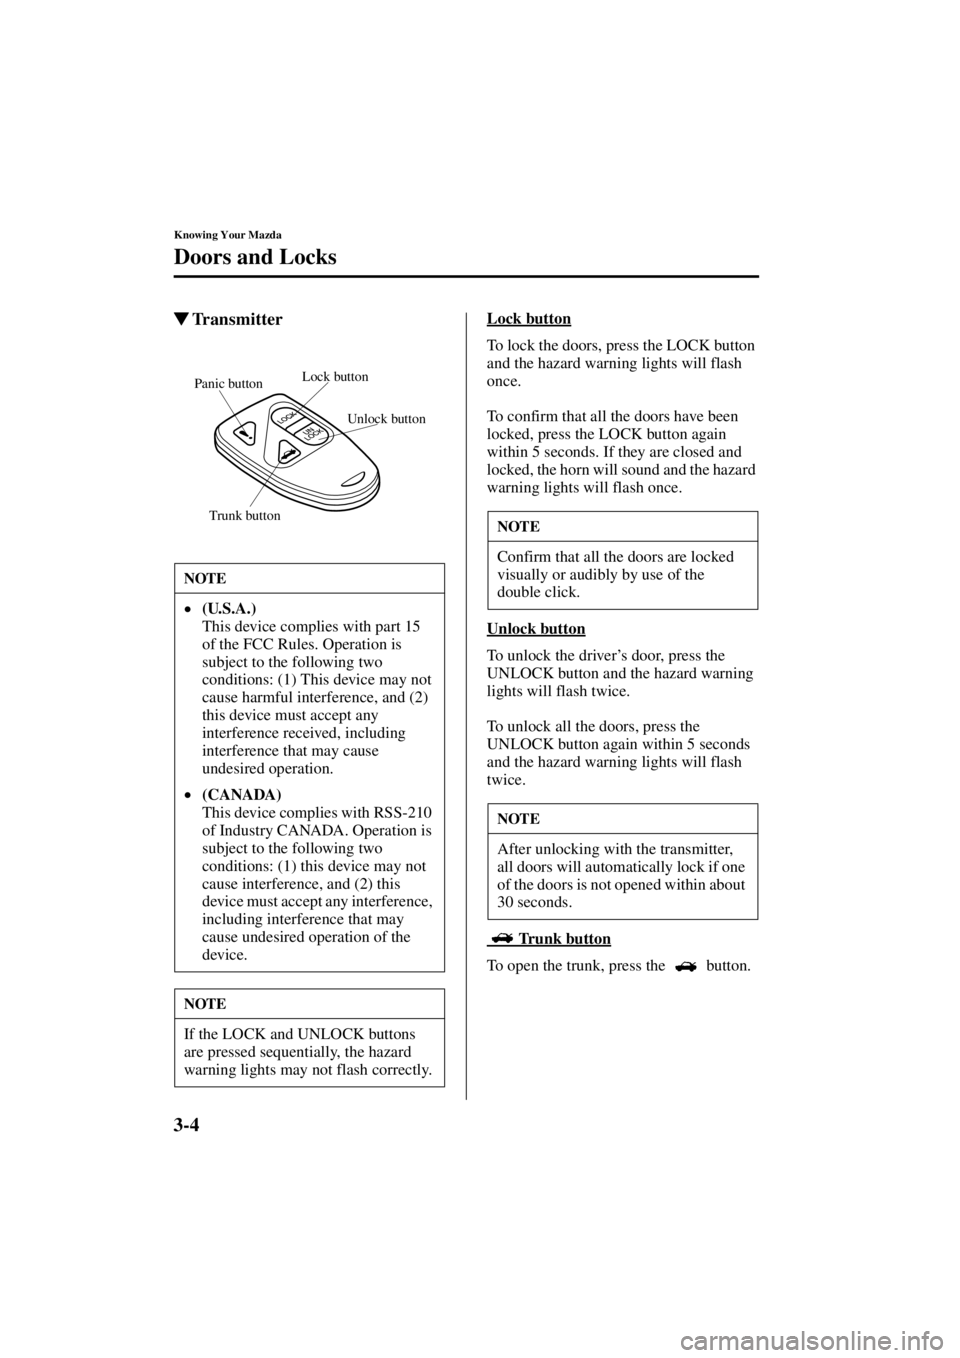 MAZDA MODEL SPEED MX-5 MIATA 2004  Owners Manual 3-4
Knowing Your Mazda
Doors and Locks
Form No. 8T02-EA-03L
TransmitterLock button
To lock the doors, press the LOCK button 
and the hazard warning lights will flash 
once.
To confirm that all the do